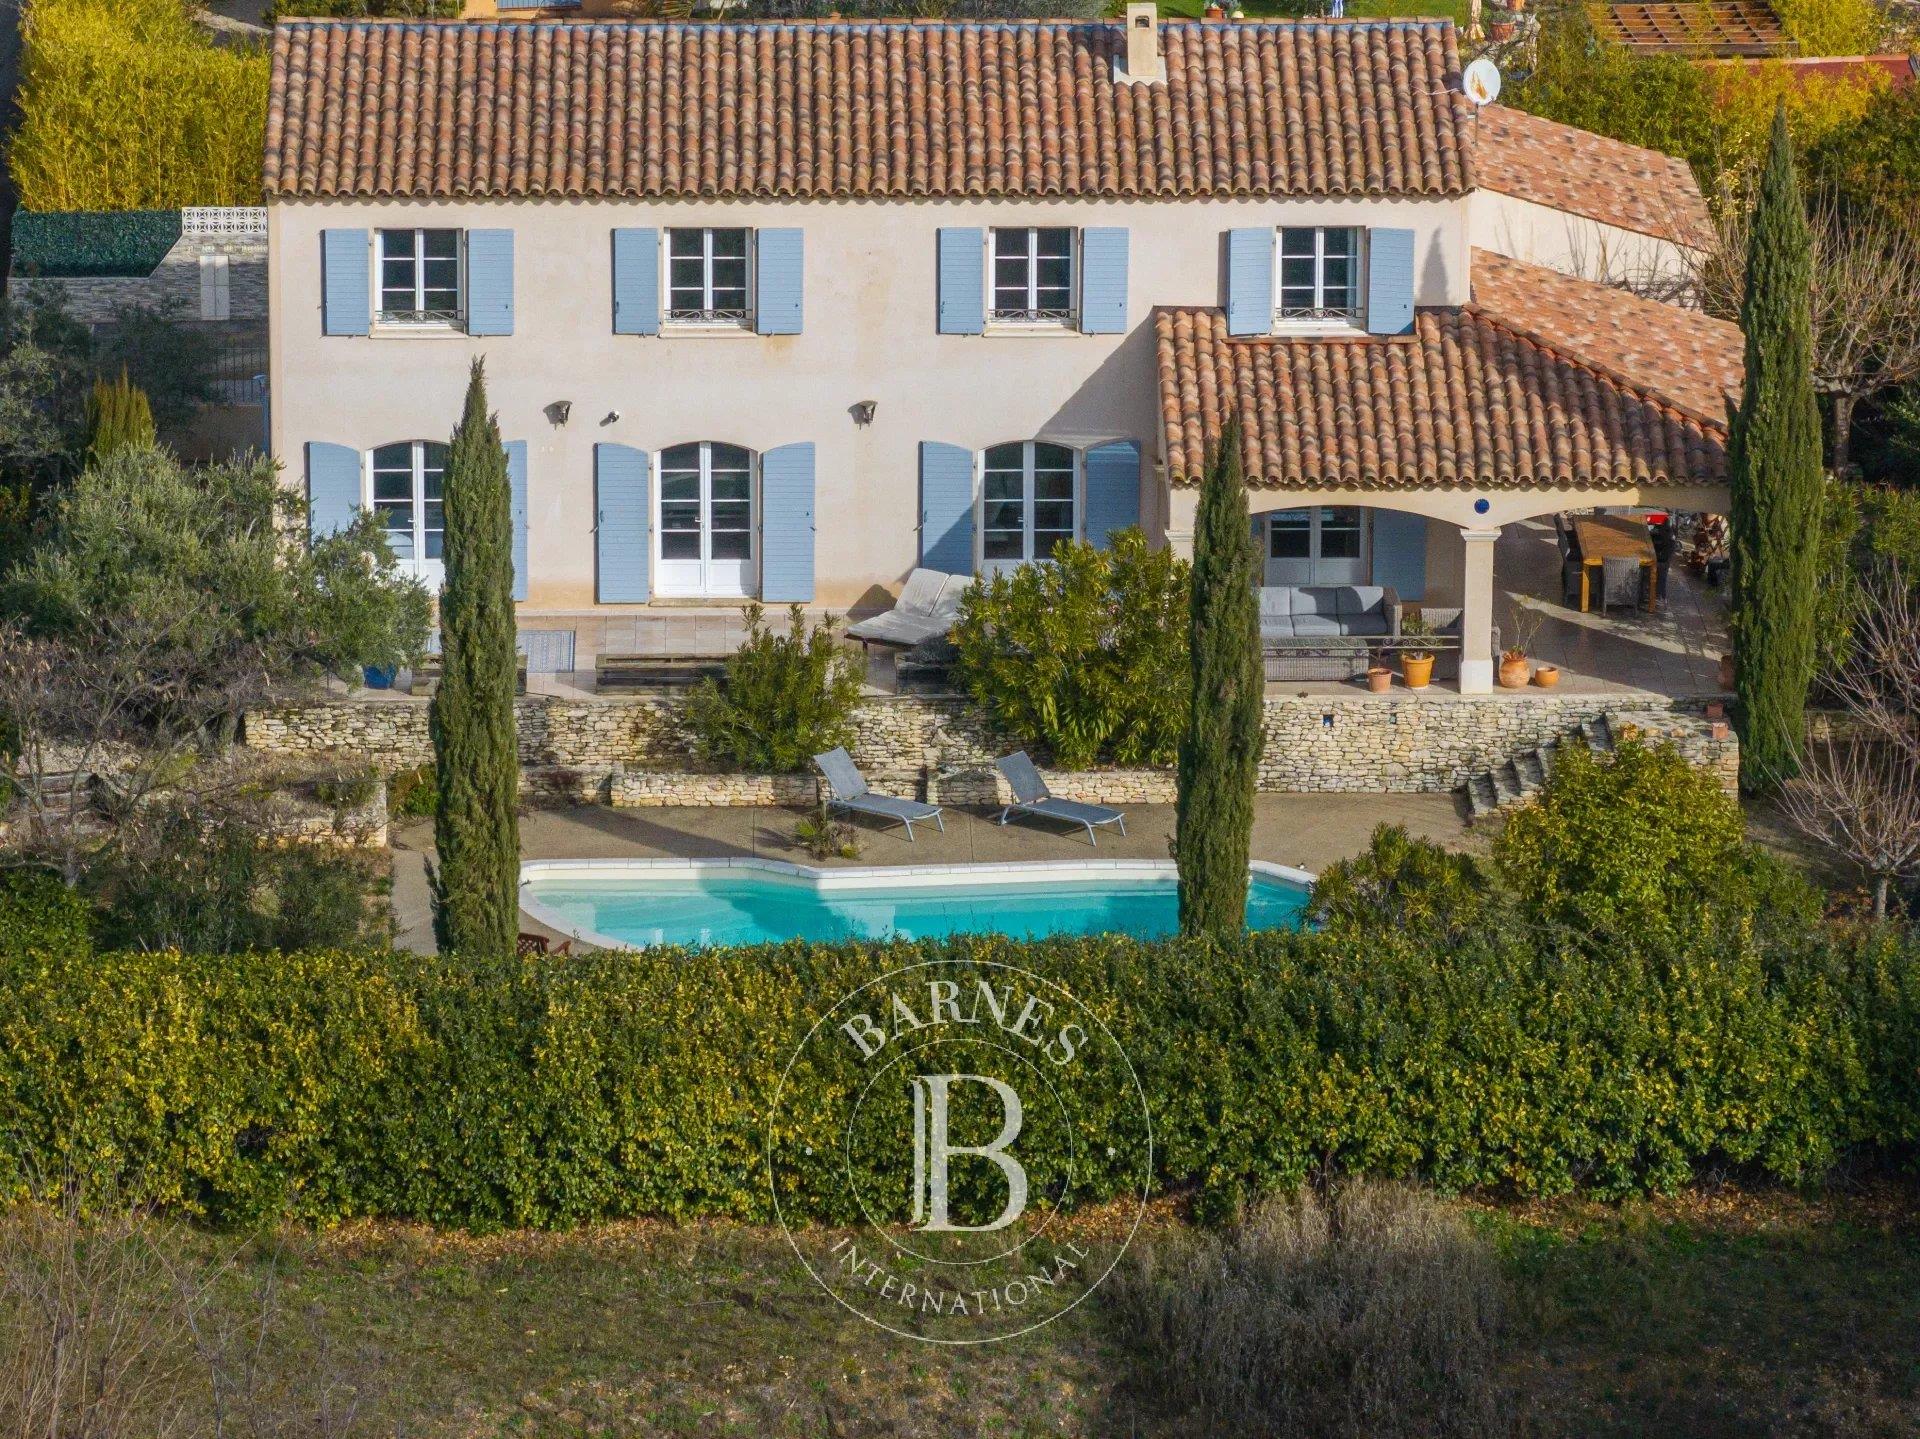 Luberon Sud Near Pertuis - Charming House 267 M² - 6 Bedrooms - Garage ...